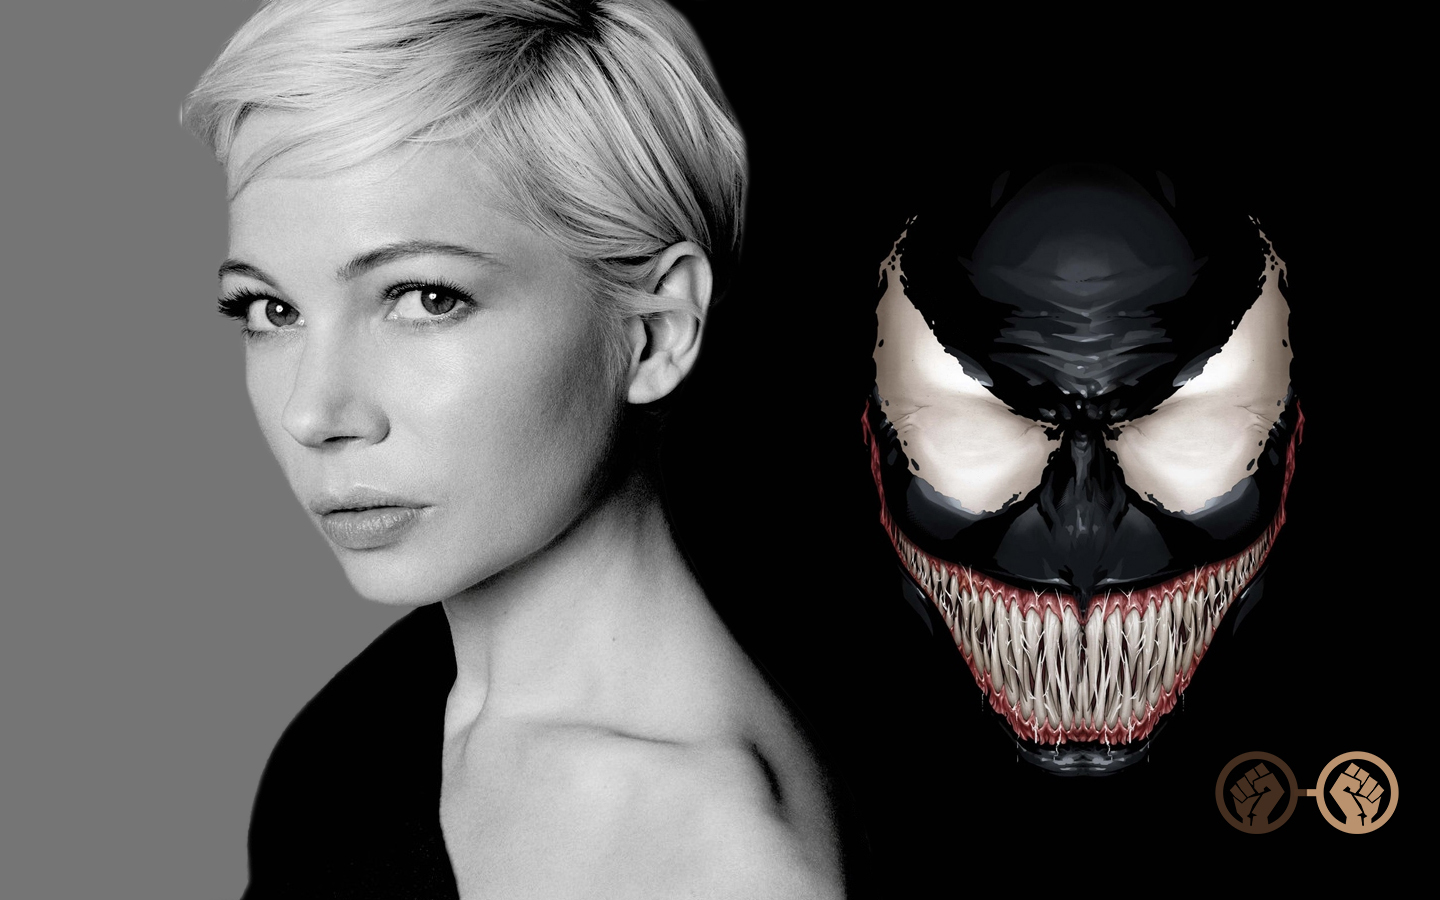 Michelle Williams Is In Talks To Join The Cast of ‘Venom’